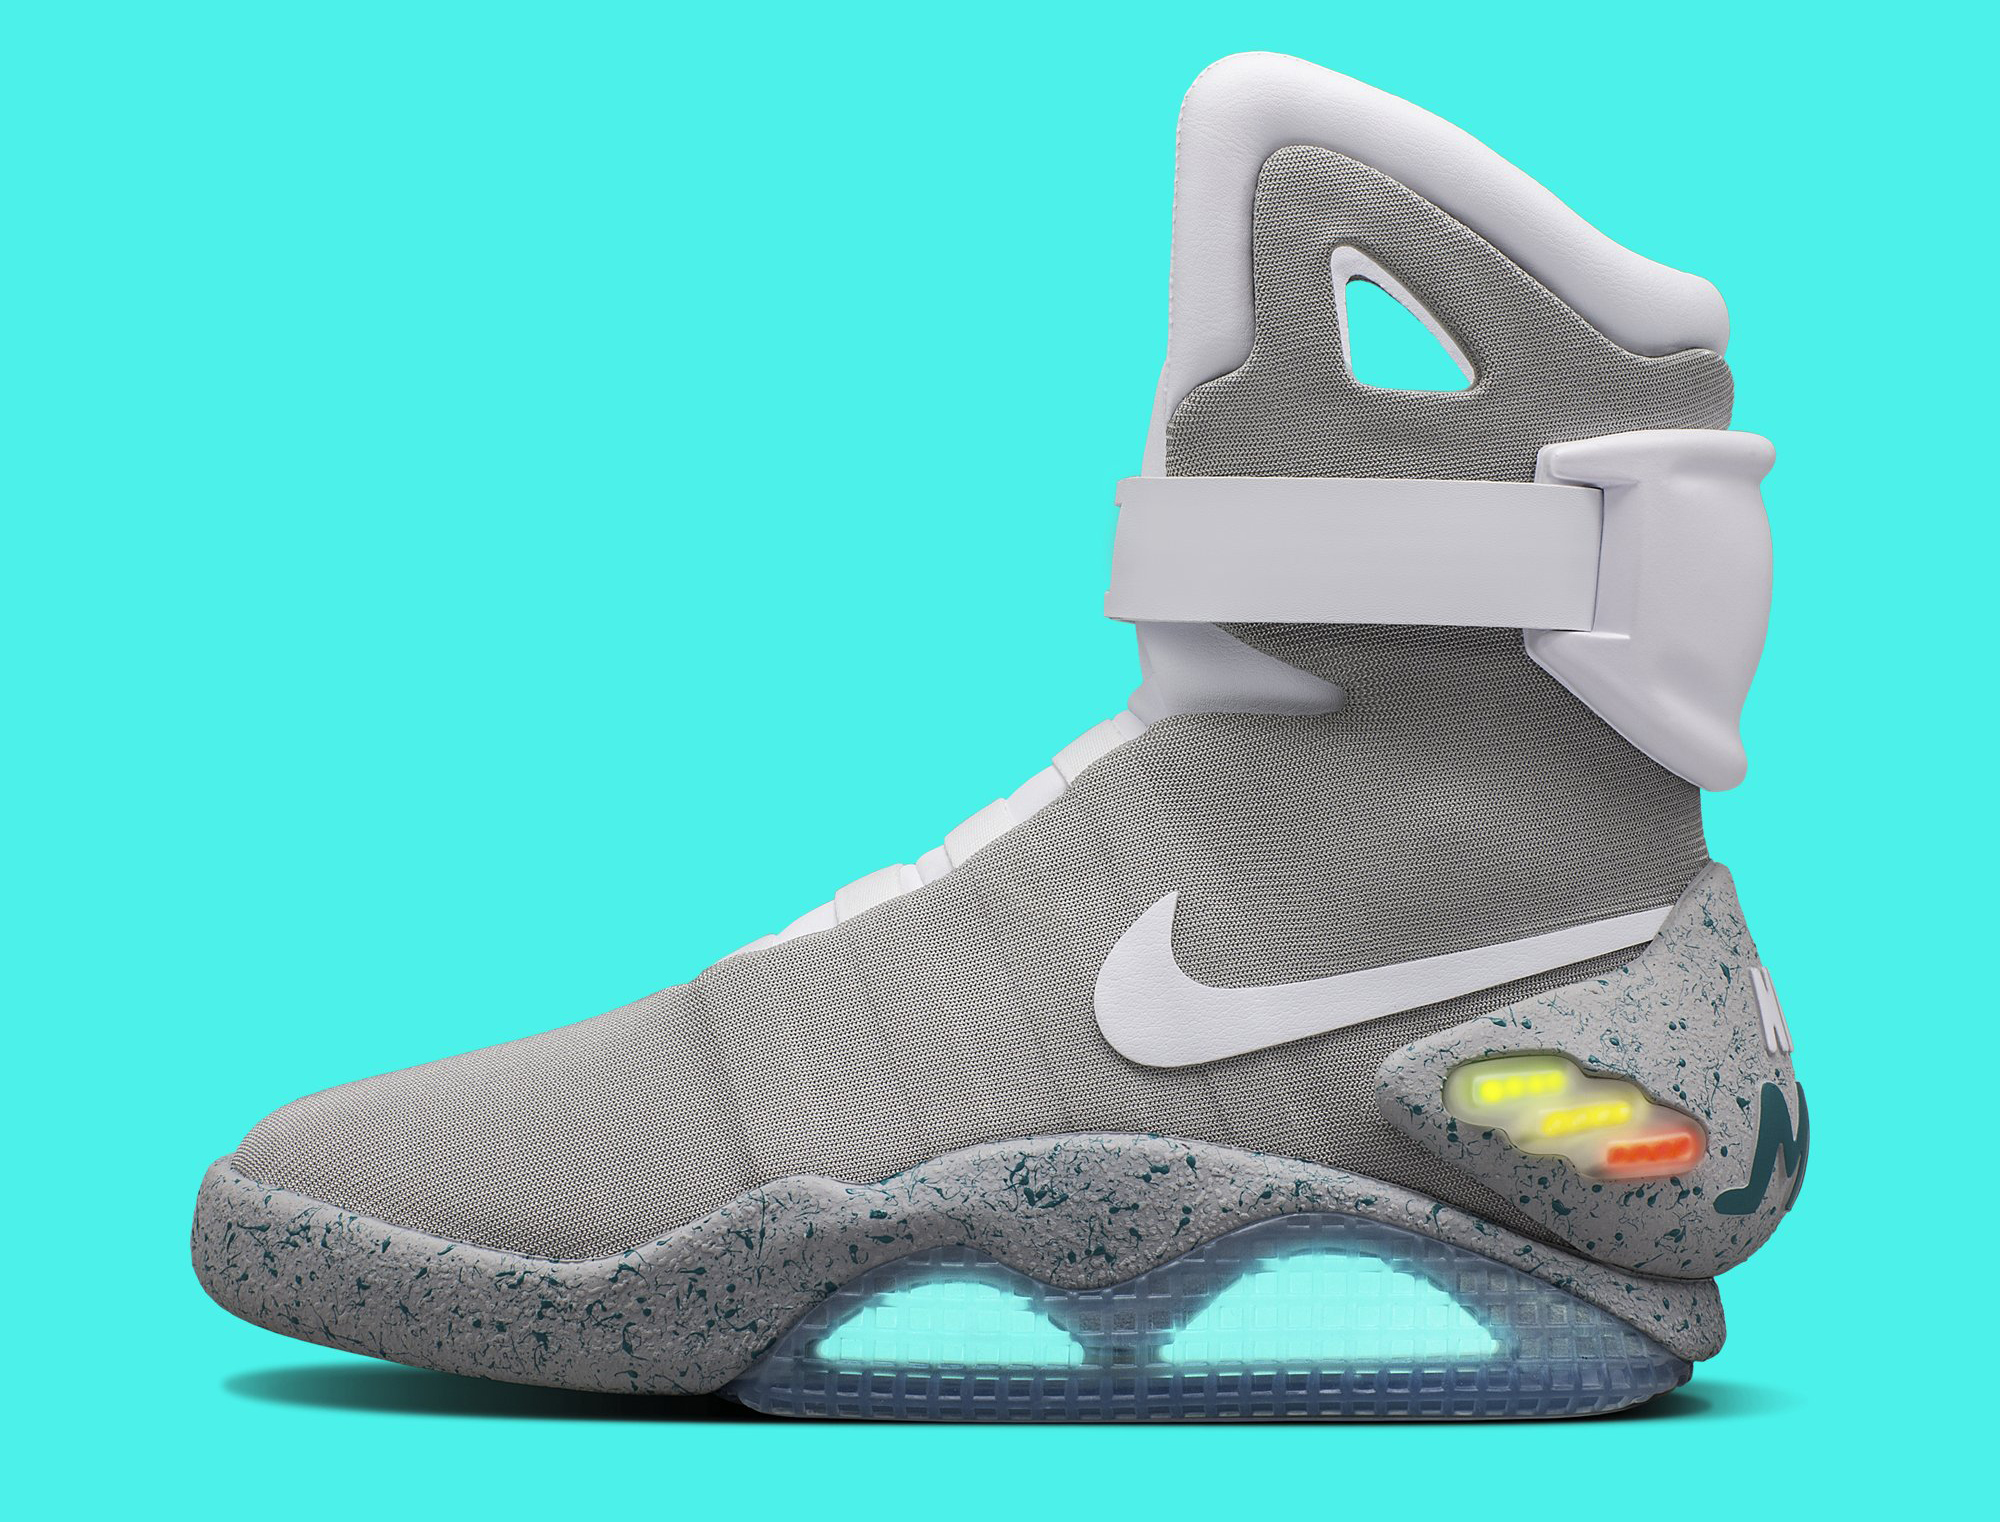 Ventilación escarcha usuario 5 Things You Need to Know About the 2016 Nike Mag Release | Complex